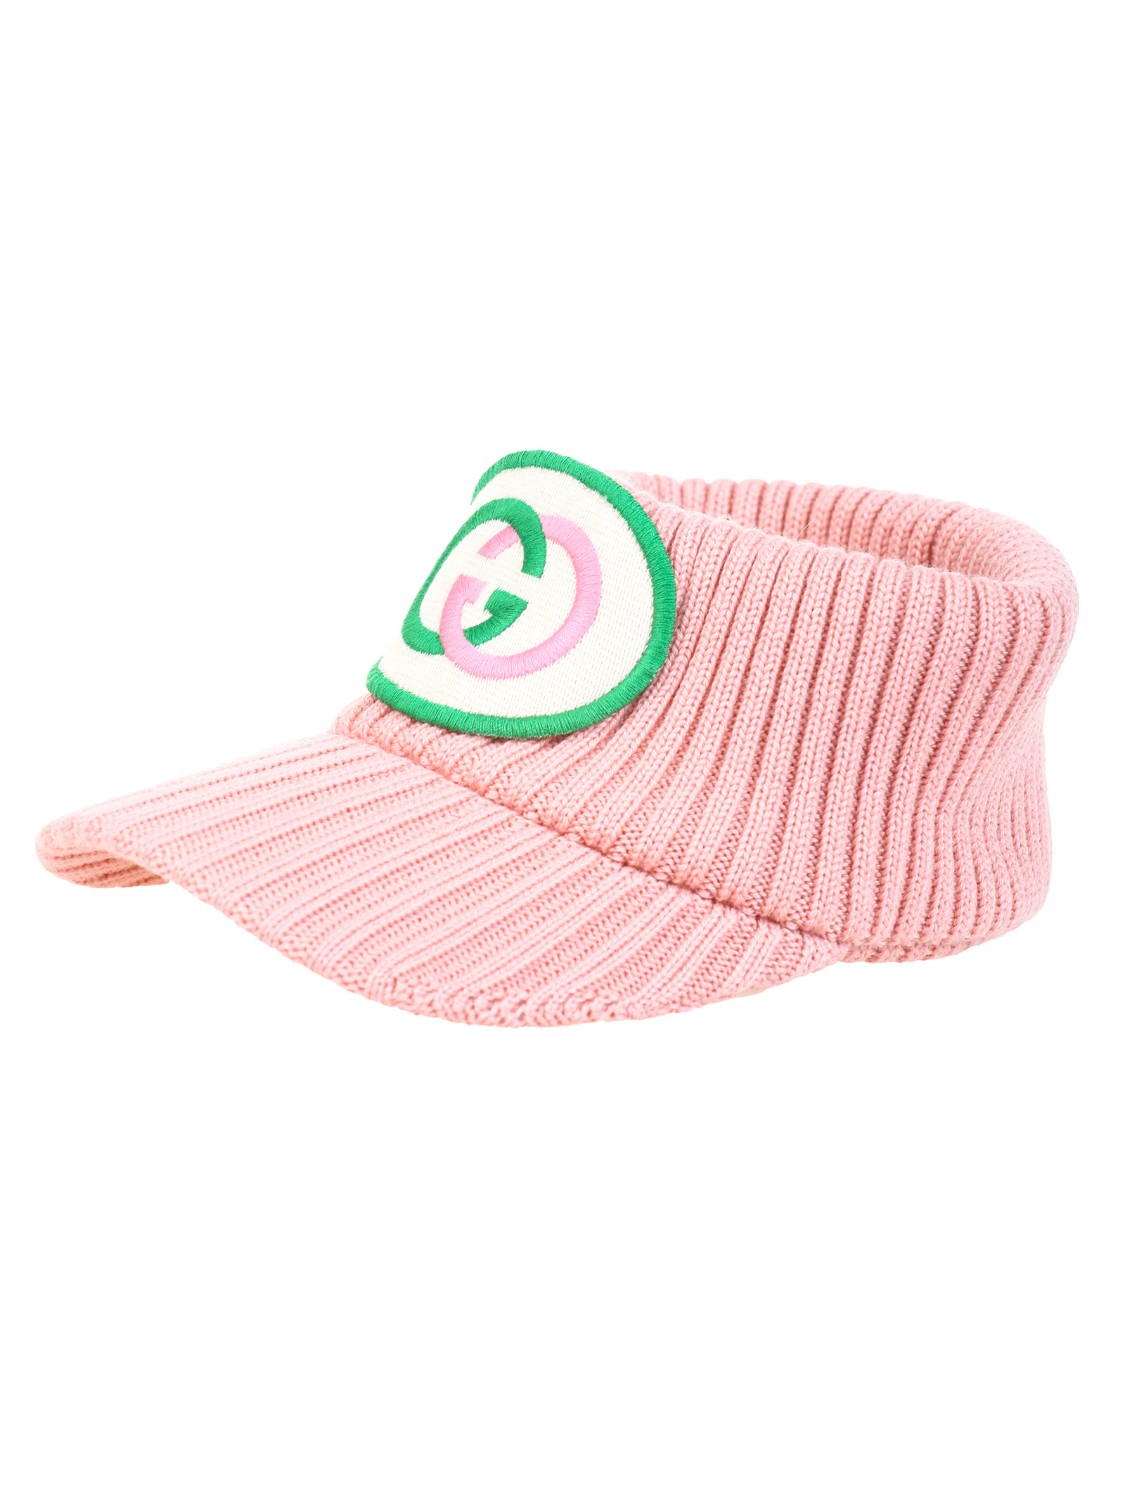 shop GUCCI  Cappello: Gucci Visiera in lana con patch GG.
Lana a coste rosa.
Composizione: 100% lana.
Made in Italy.. 577825 3GD55-5900 number 9899812